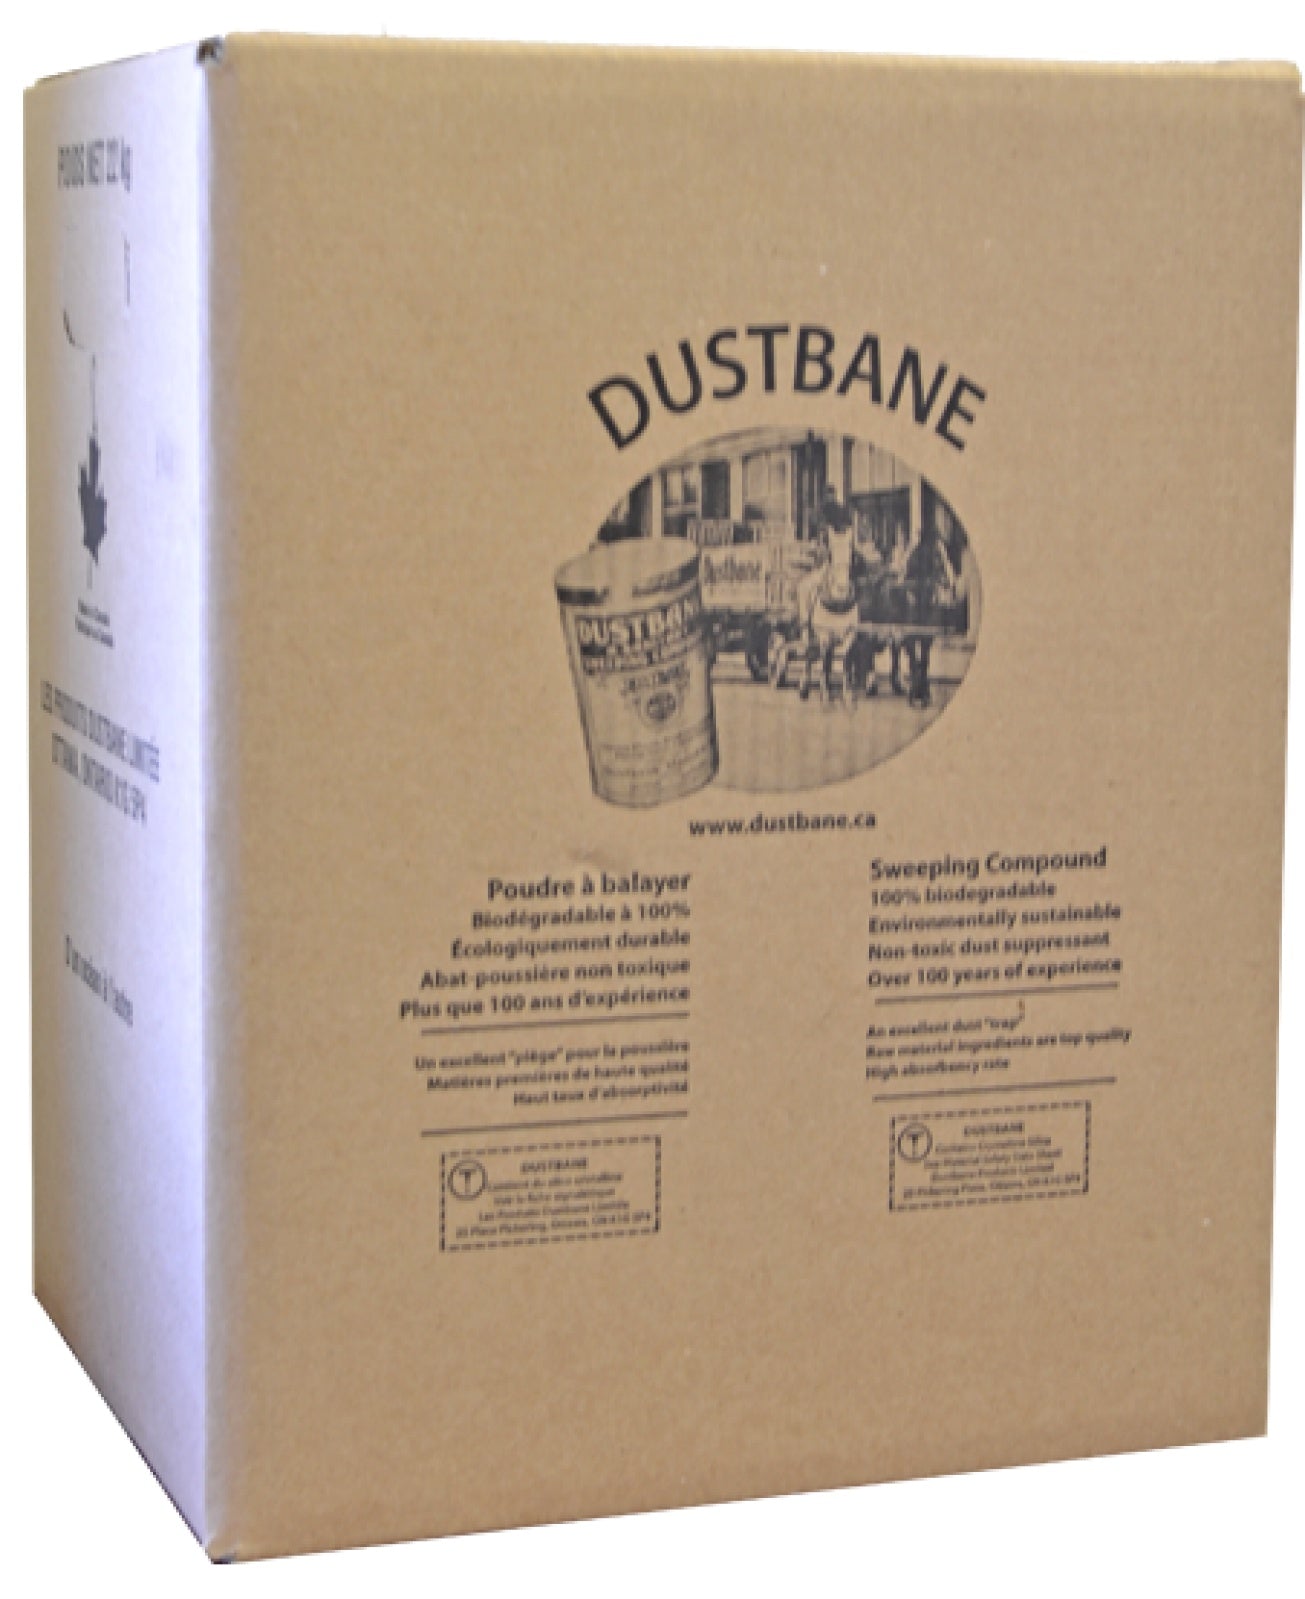 22KG DUSTBANE® SWEEPING COMPOUND, 100% BIODEGRADEABLE